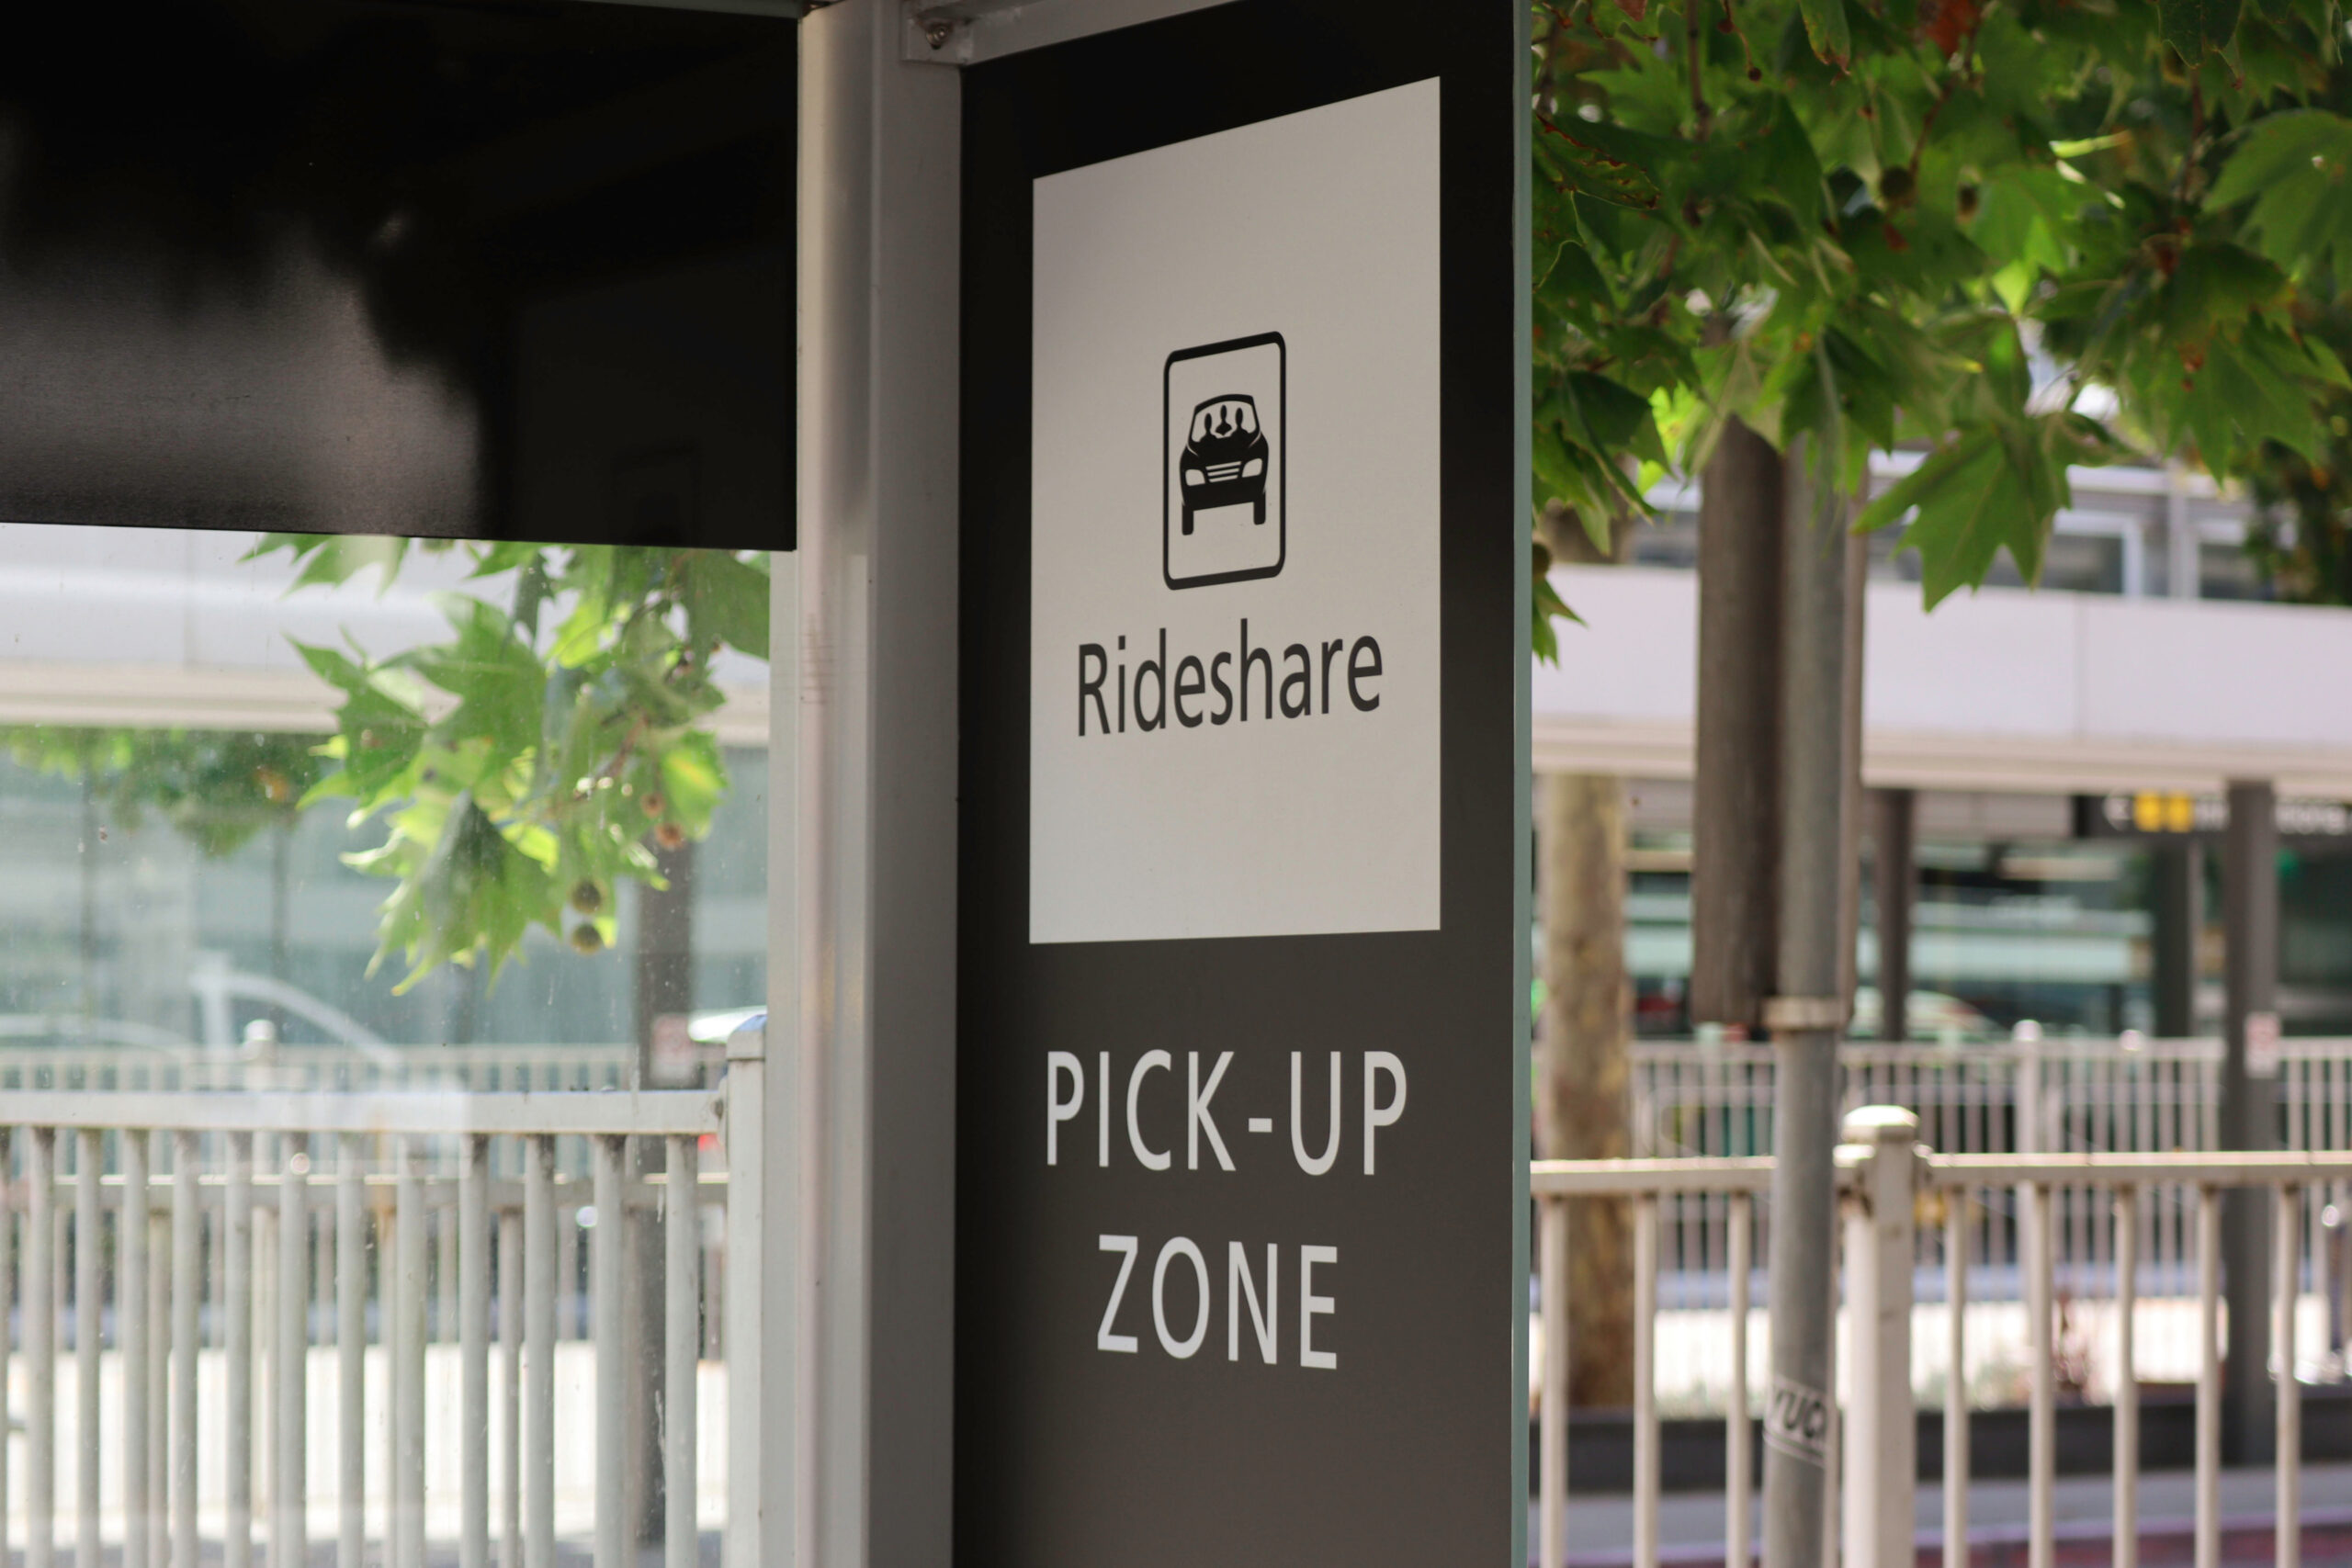 a rideshare pick-up zone sign at a place of business